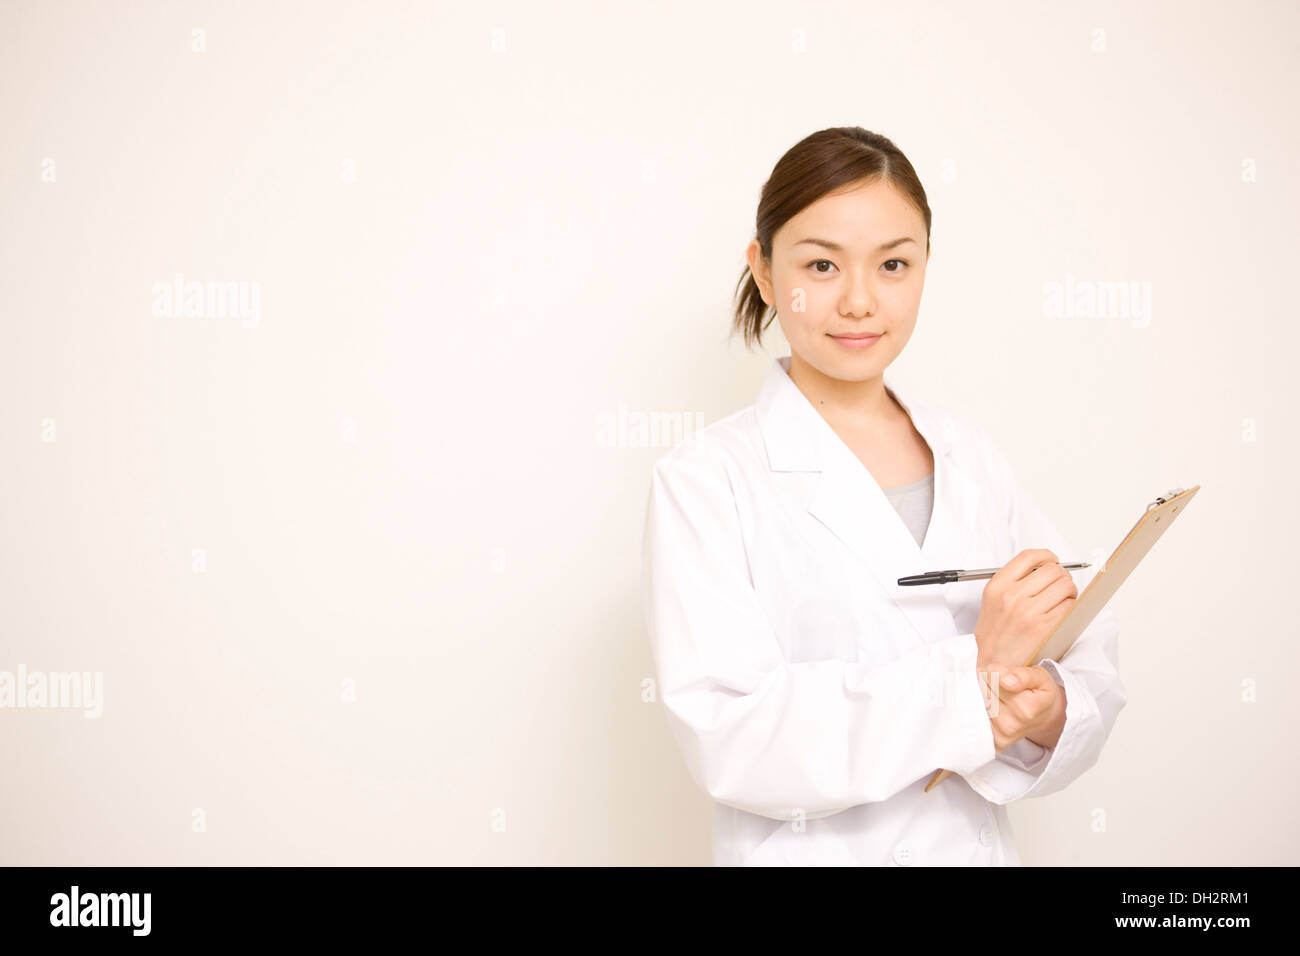 White background, young female doctor filling in a binder Stock Photo